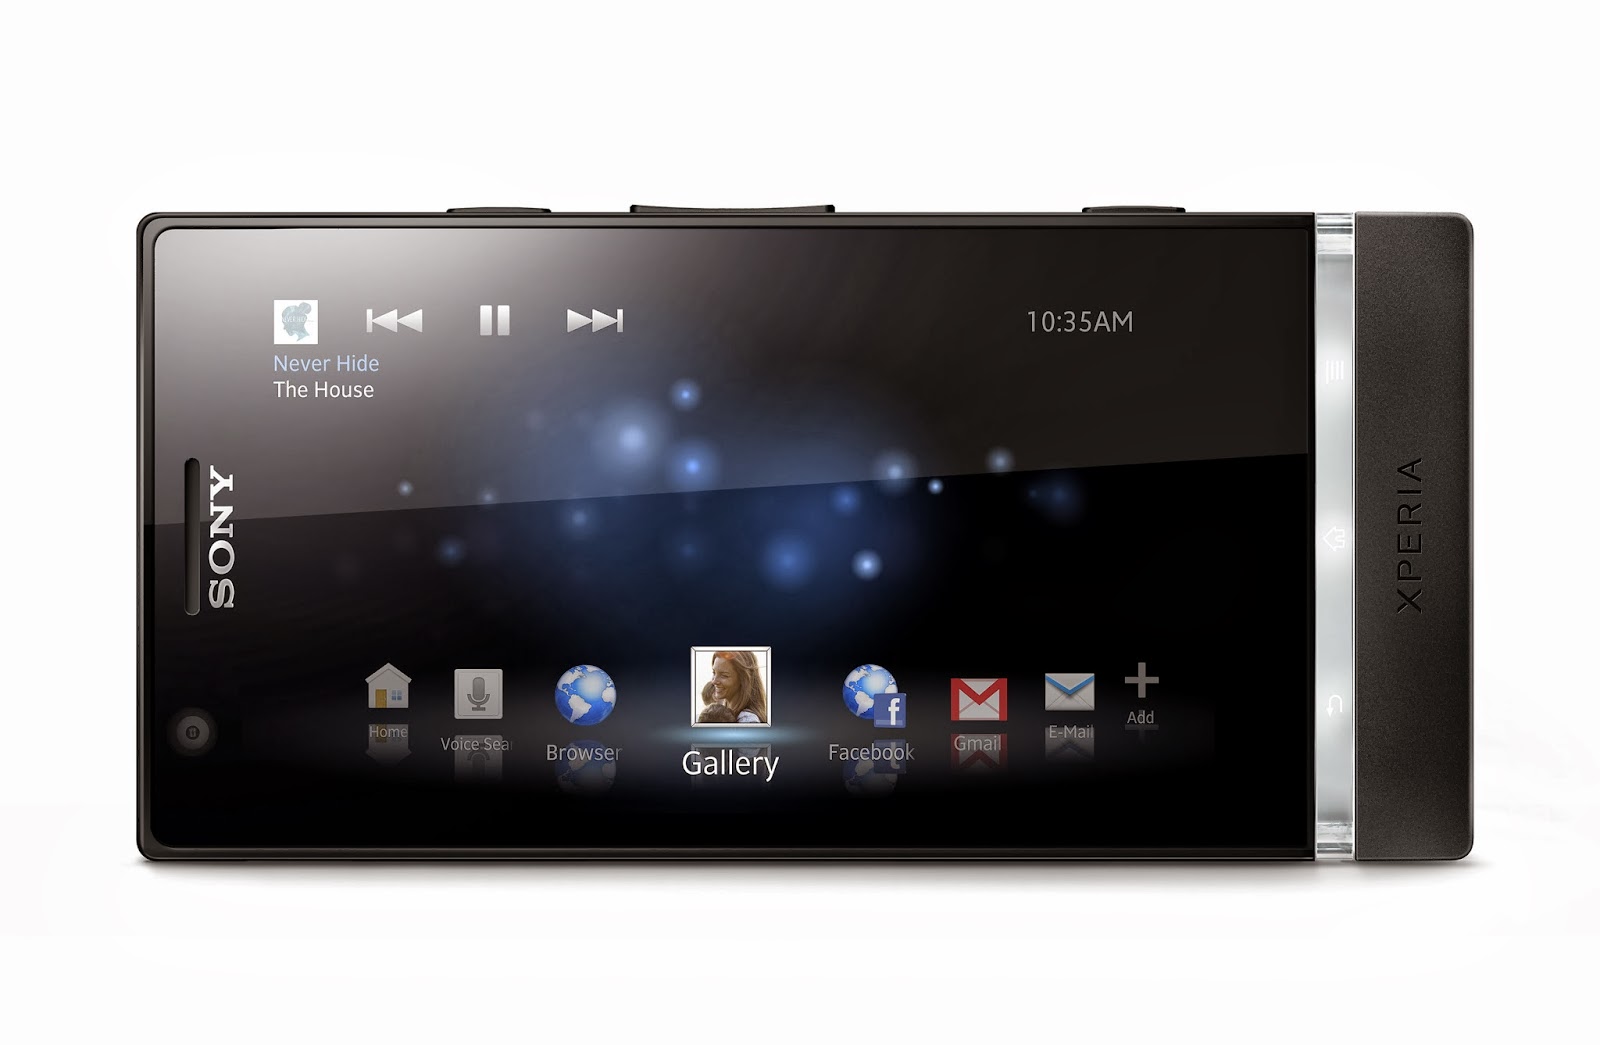 ... xperia p photos sony xperia p in silver black red colors wallpaper